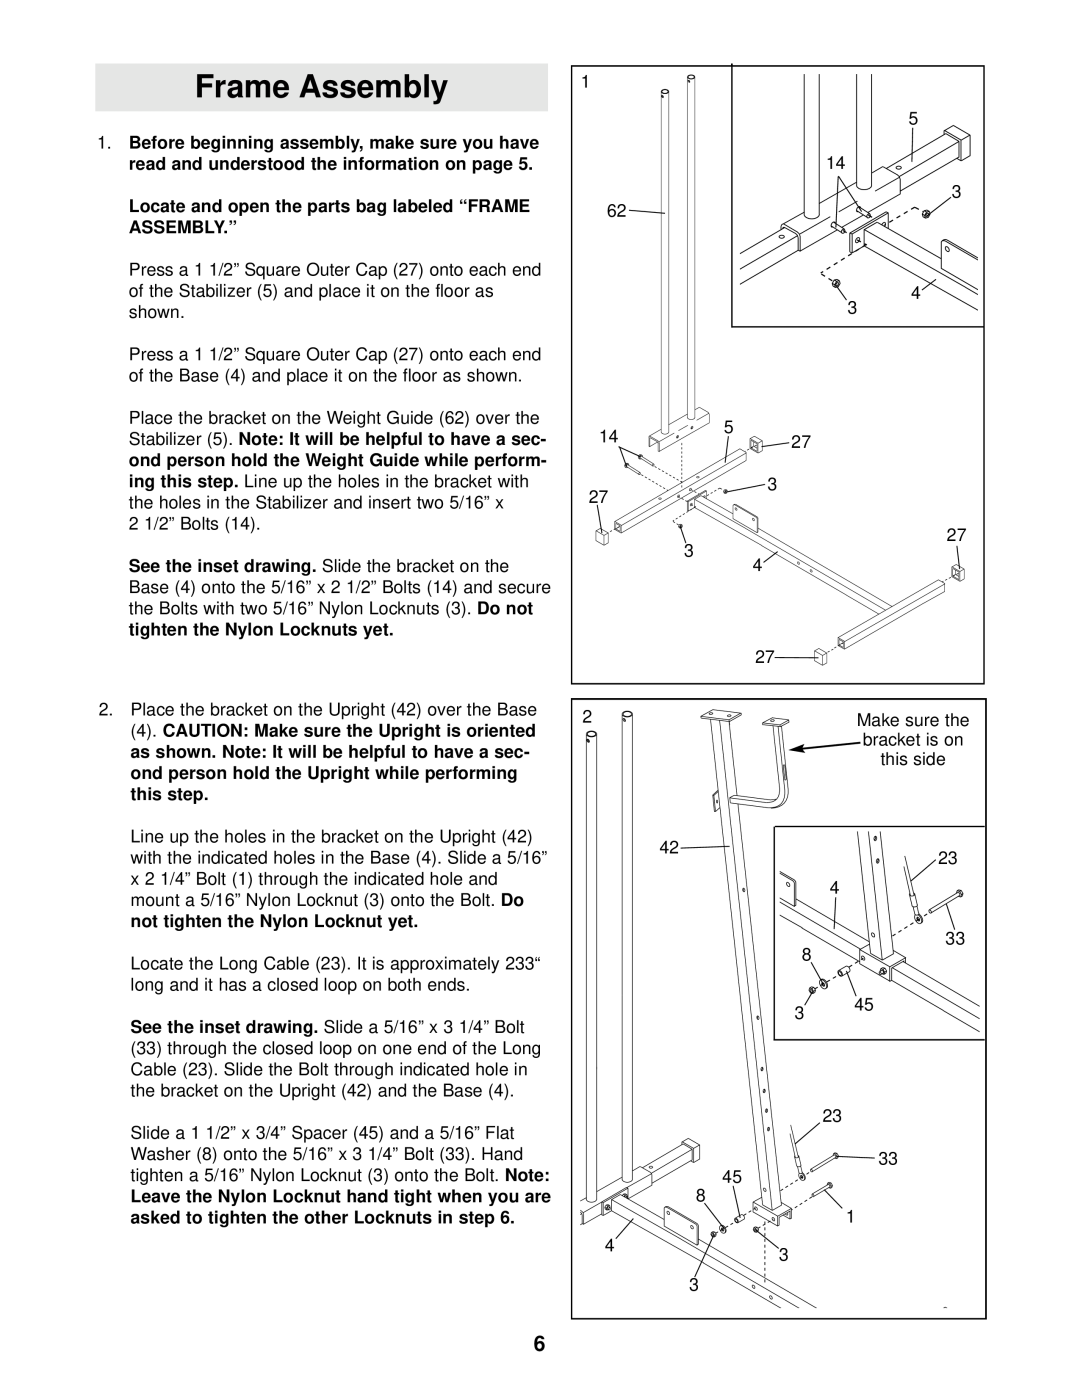 Weider 740 user manual Frame Assembly, Locate and open the parts bag labeled “FRAME ASSEMBLY.”, See the inset drawing 